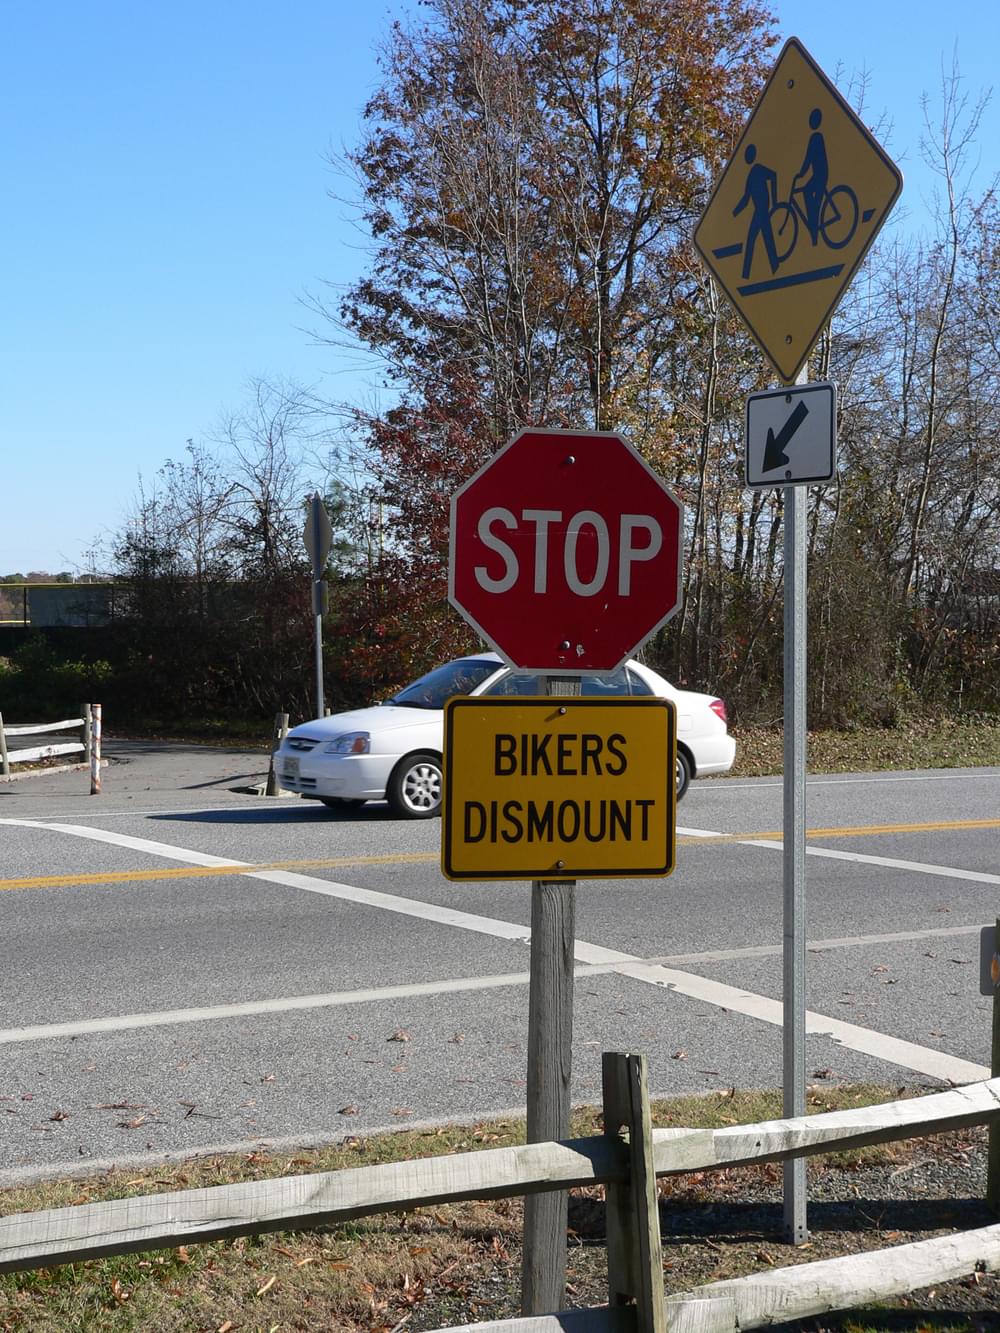 In addition to stop sign for trail users, motorists see yellow highway warning sign with bike/ped symbols; on the Eastern Shore of Maryland